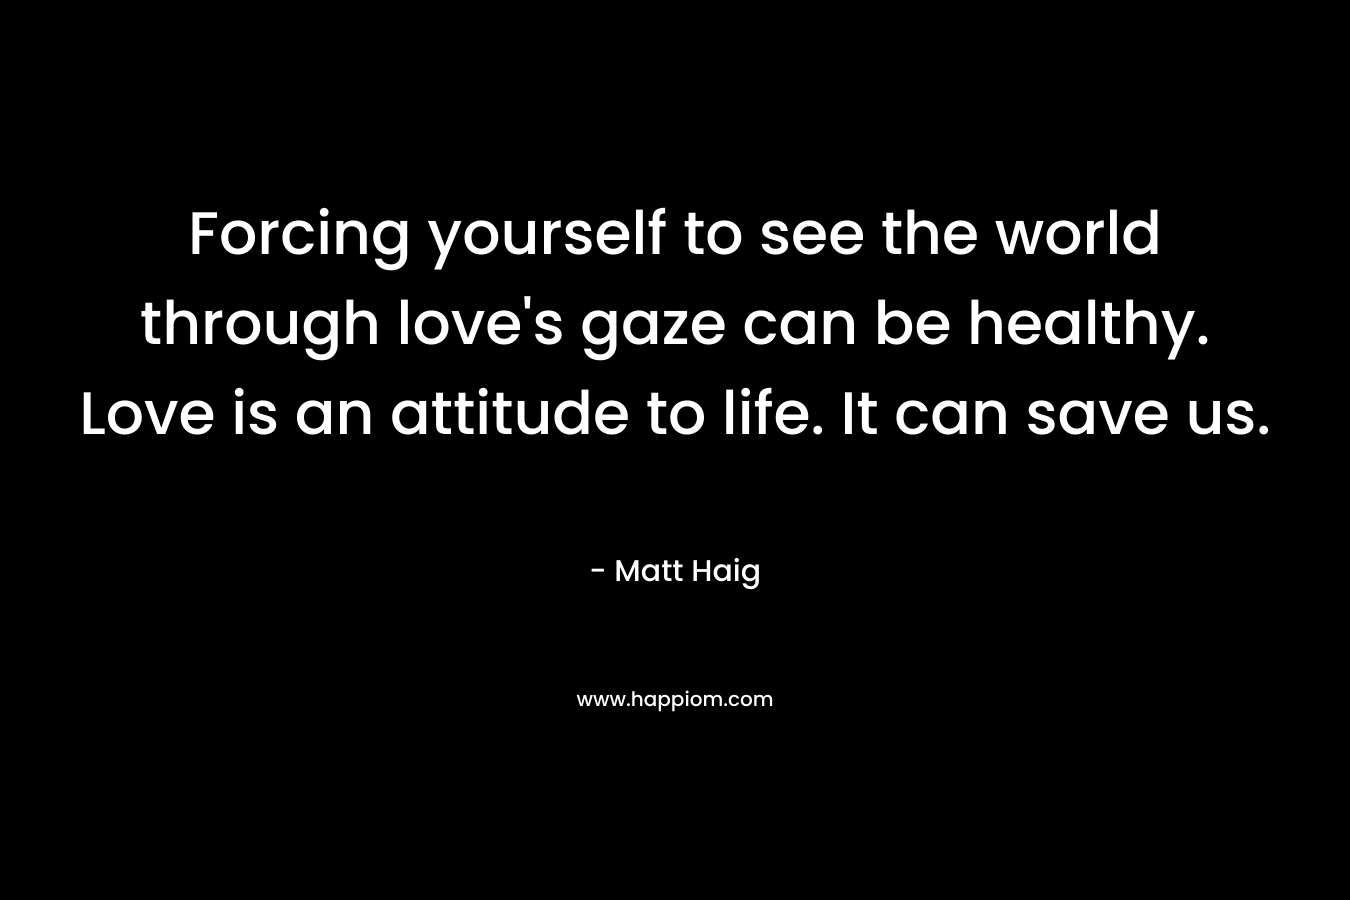 Forcing yourself to see the world through love’s gaze can be healthy. Love is an attitude to life. It can save us. – Matt Haig